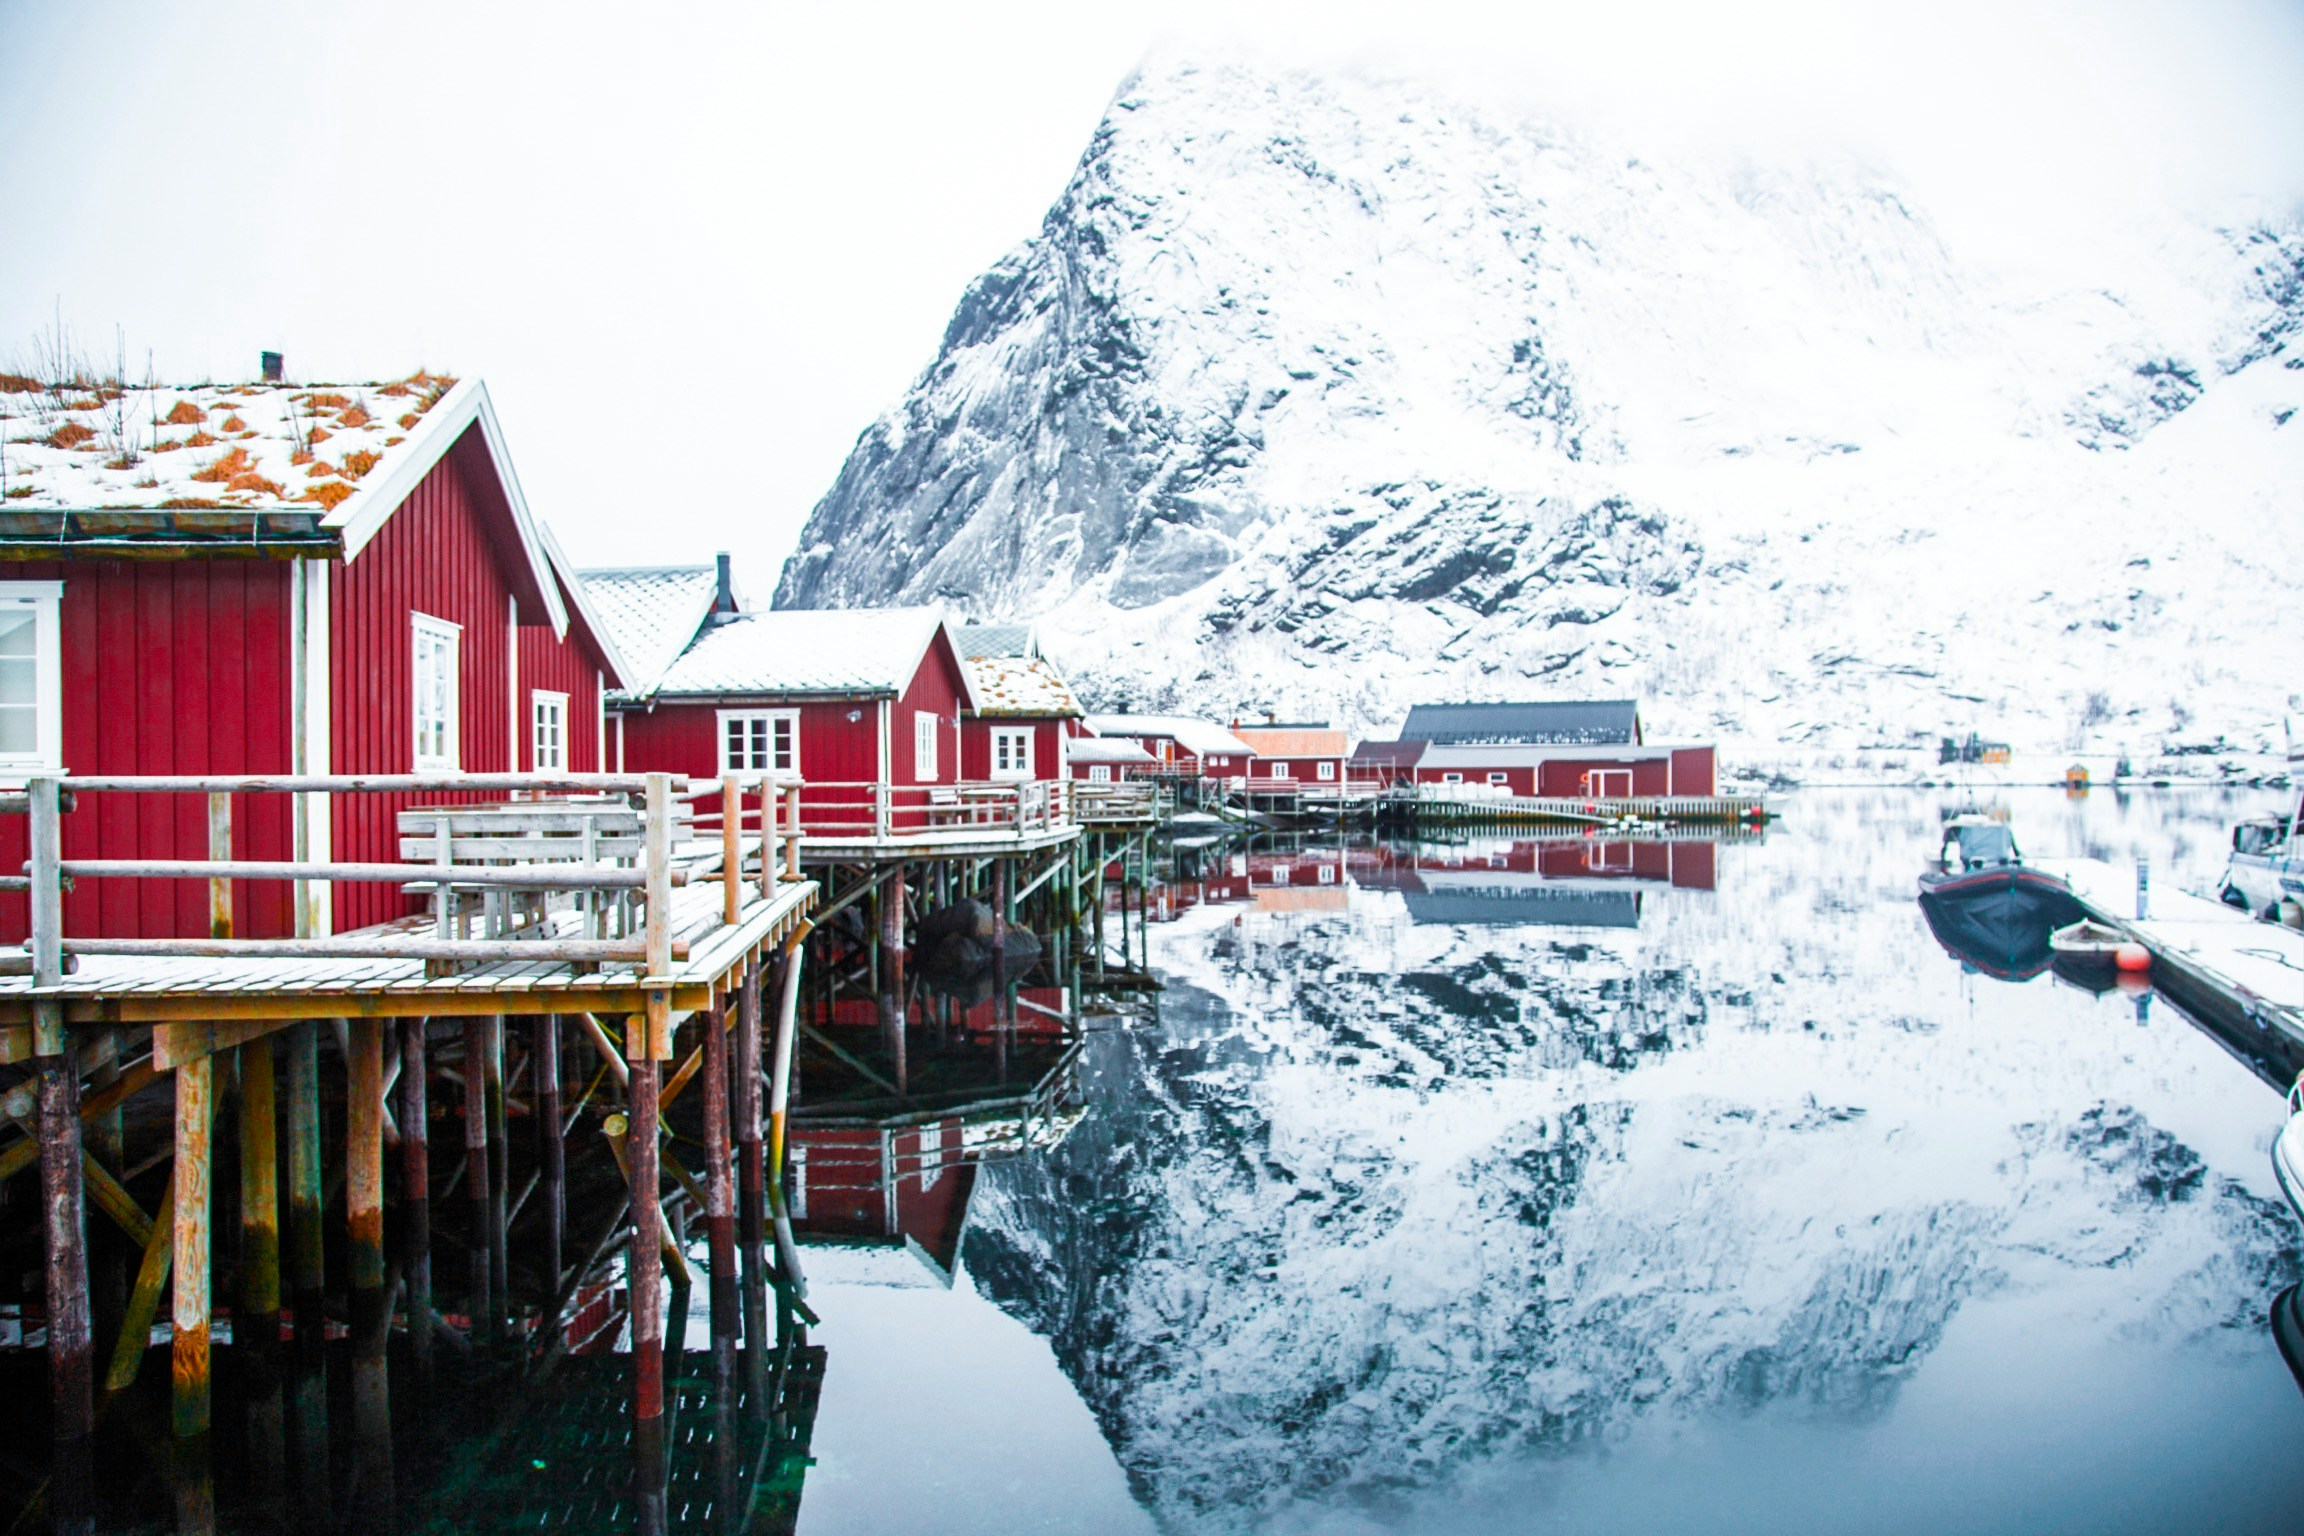 discover the breathtaking beauty of fjords with our expert guides and plan your next unforgettable adventure.